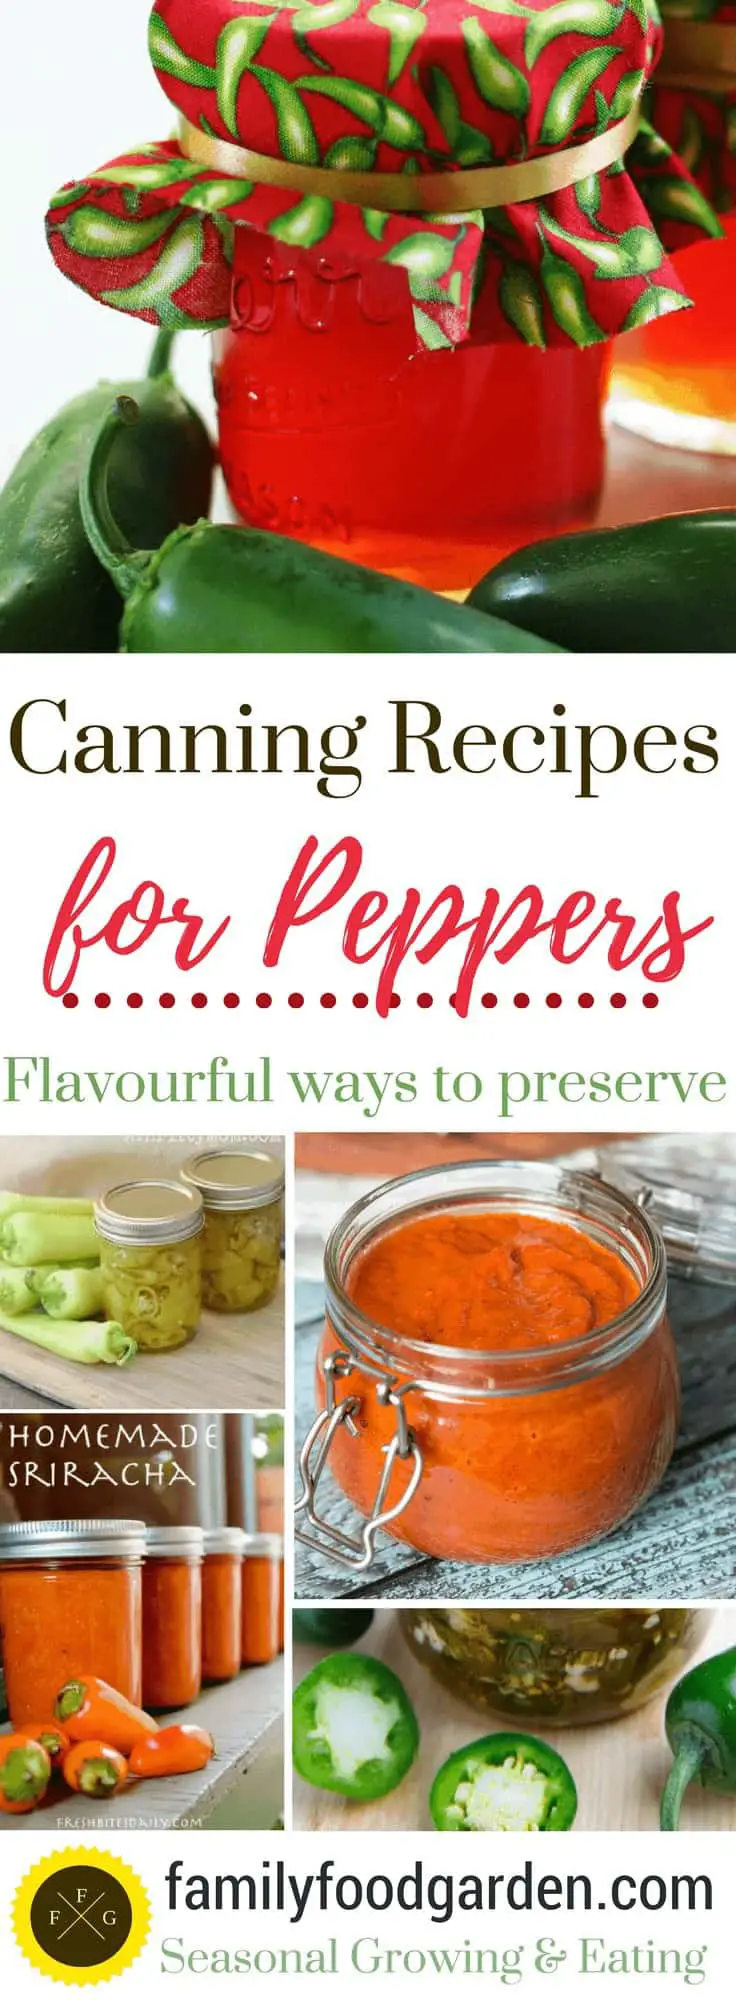 Canning recipes for preserving peppers